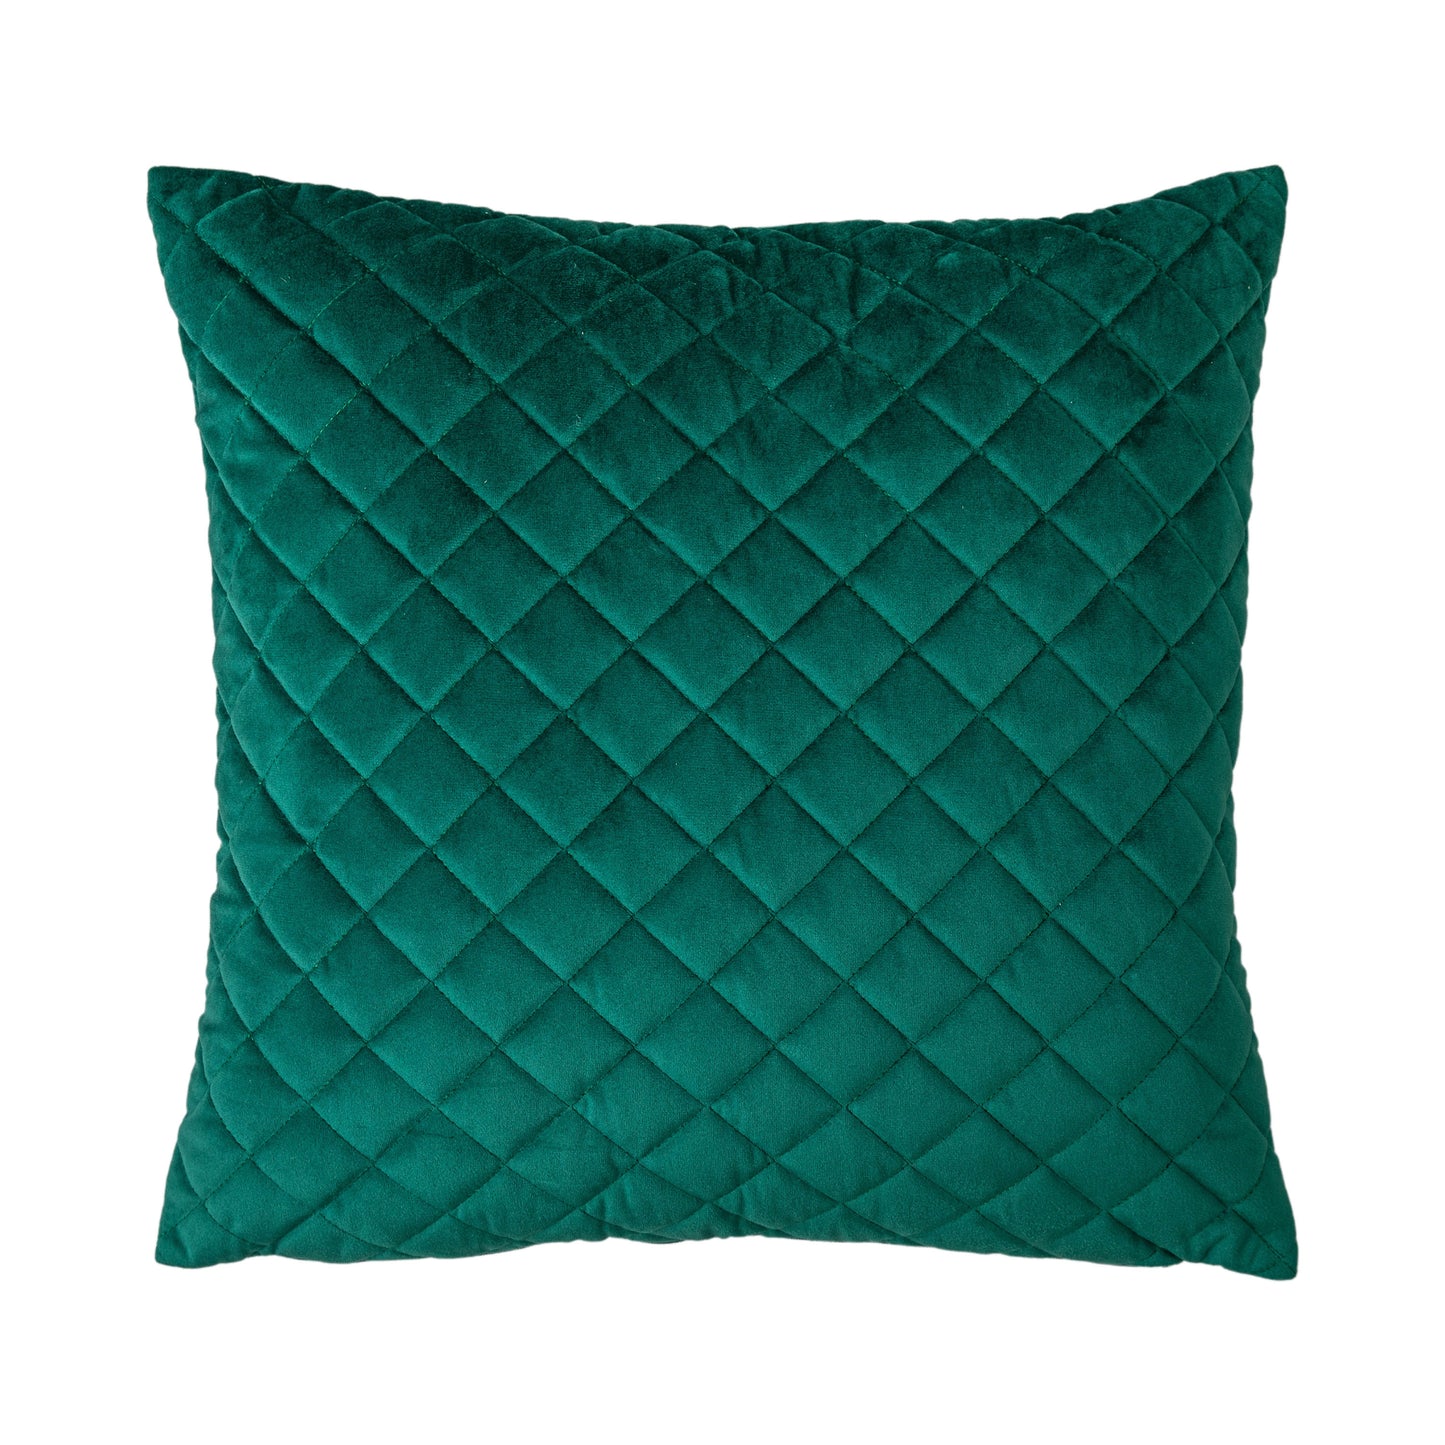 Load image into Gallery viewer, A Home furniture item, the Trellis Velvet Cushion Emerald 450x450mm (2pk) by Kikiathome.co.uk, showcased on a white background.
